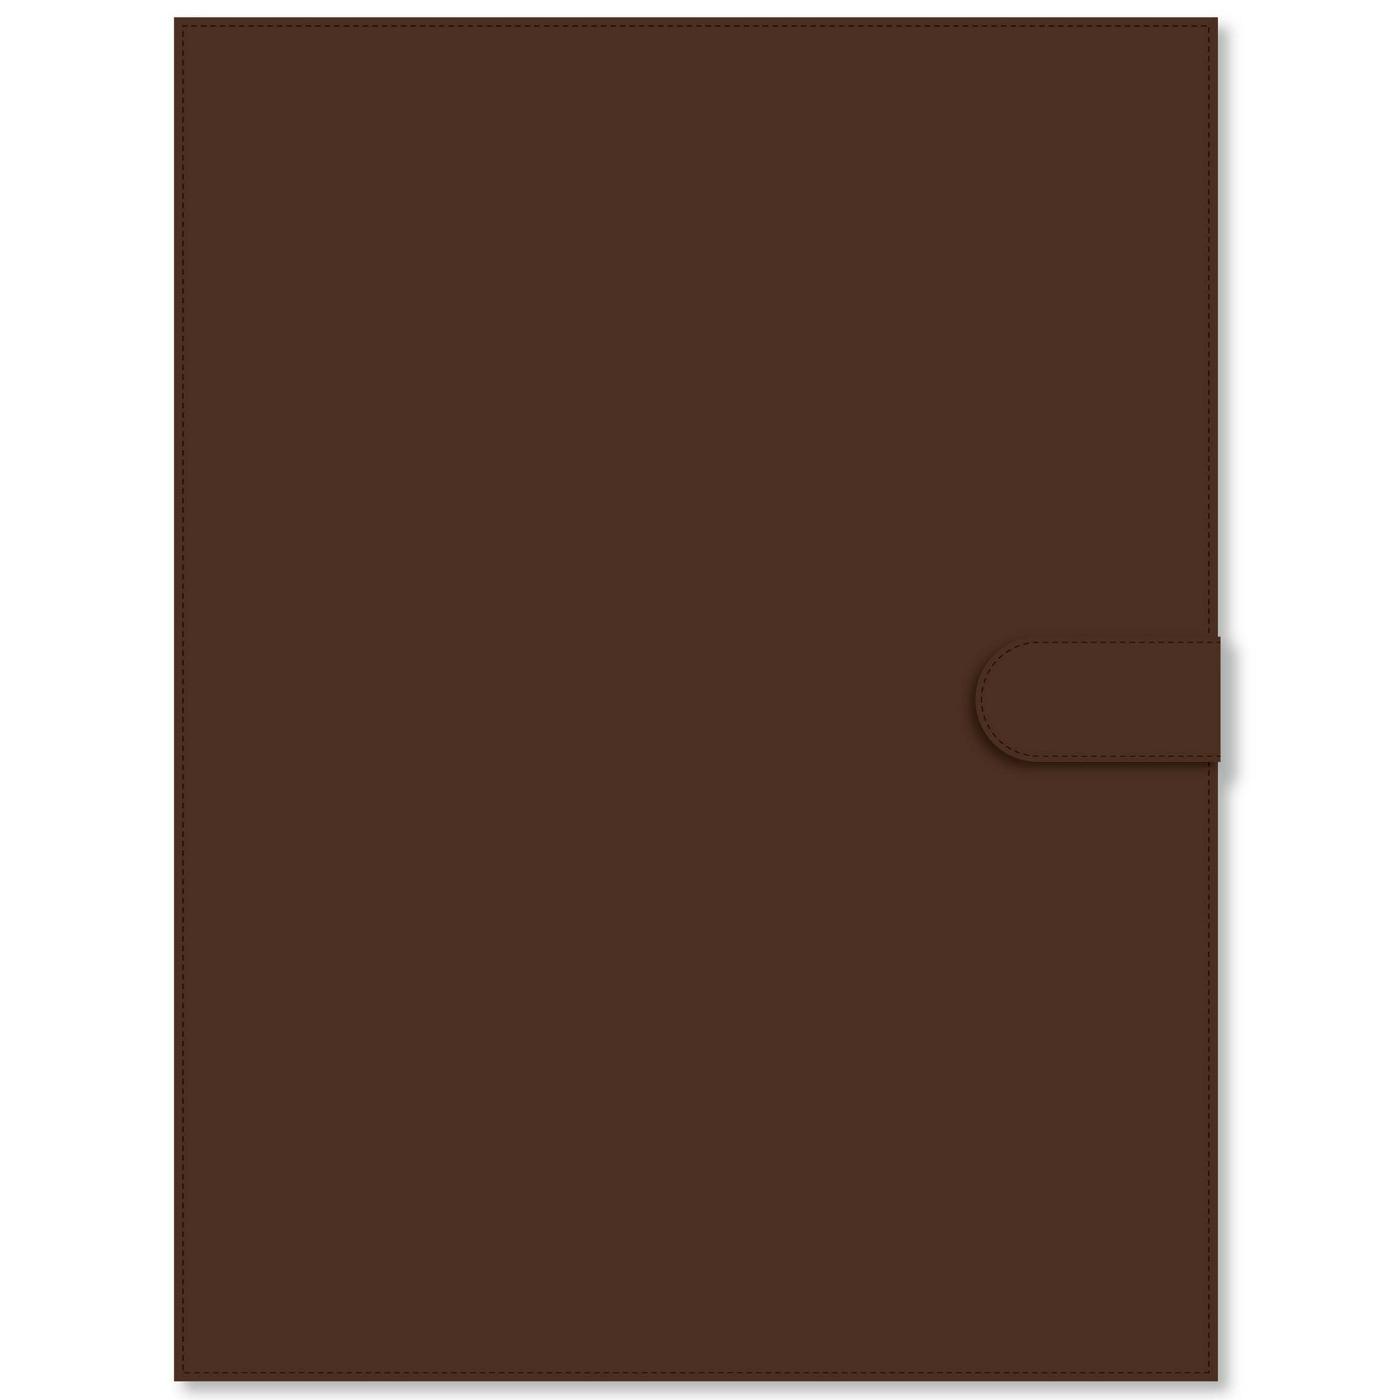 C.R. Gibson Project Planner Notebook - Tan; image 1 of 2